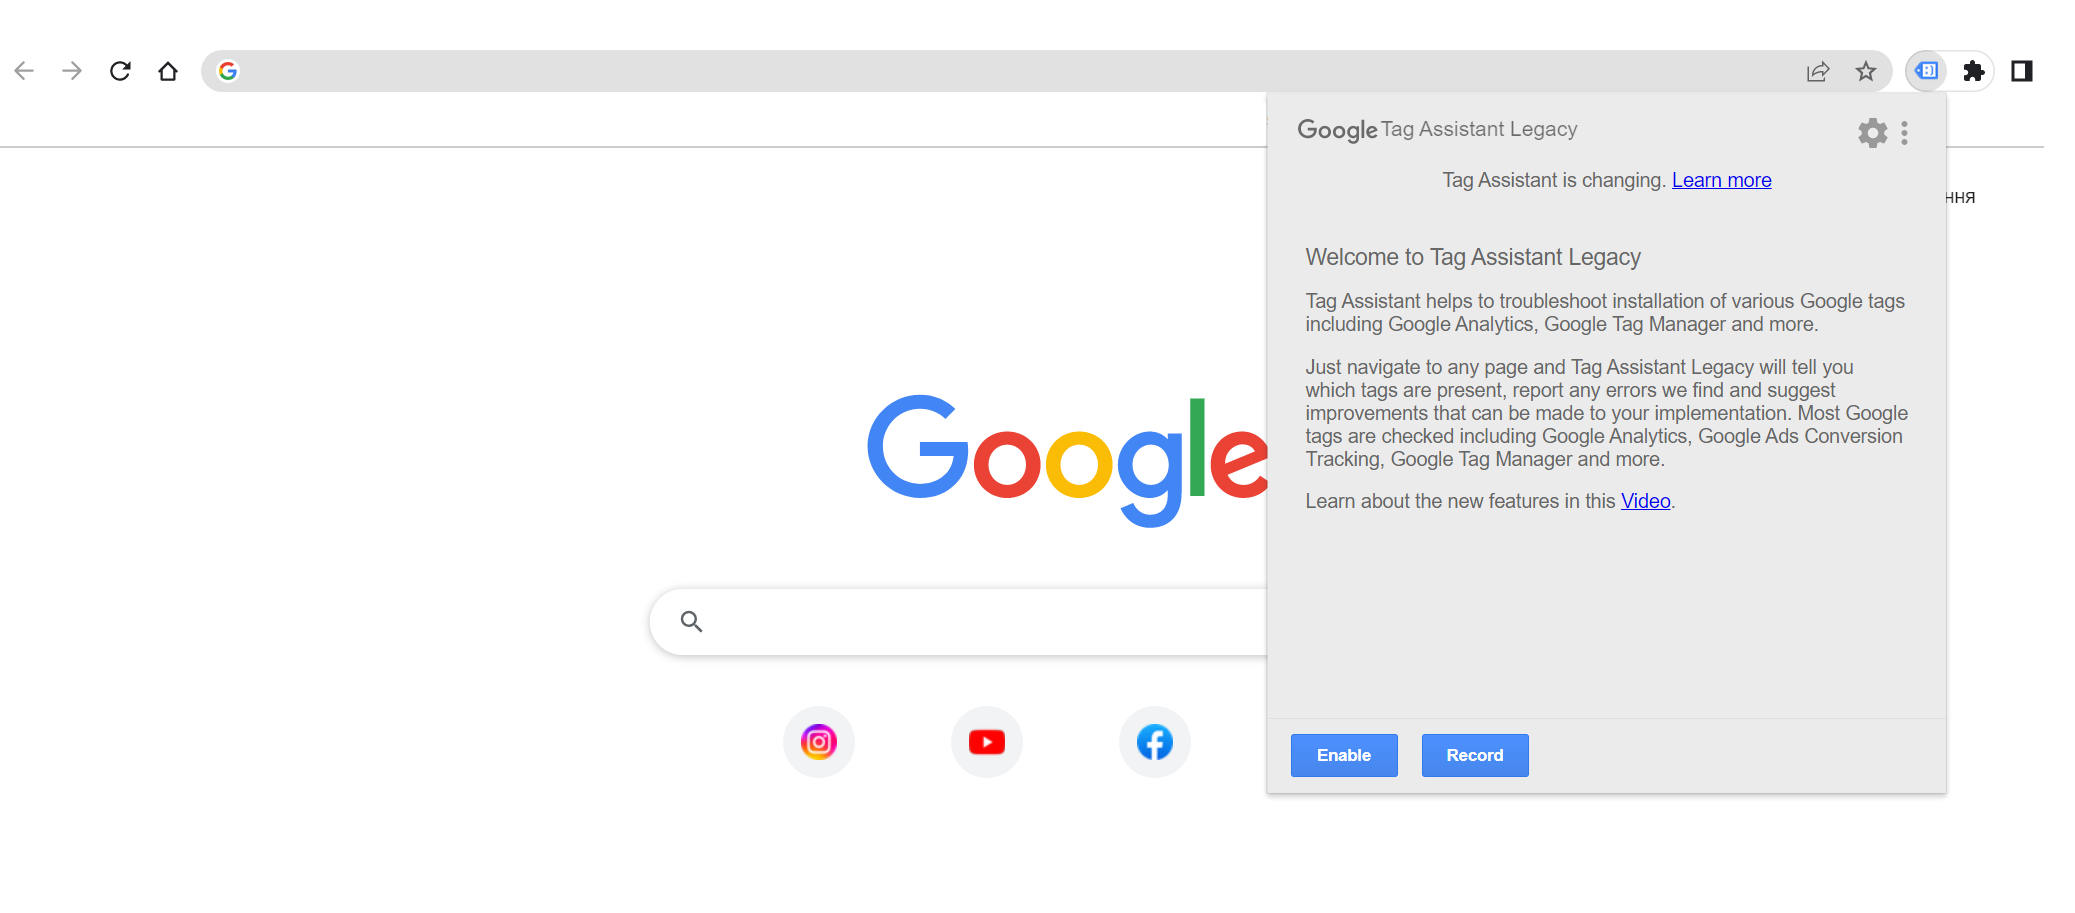 How to Exclude Internal Traffic, Google Tag Assistant 